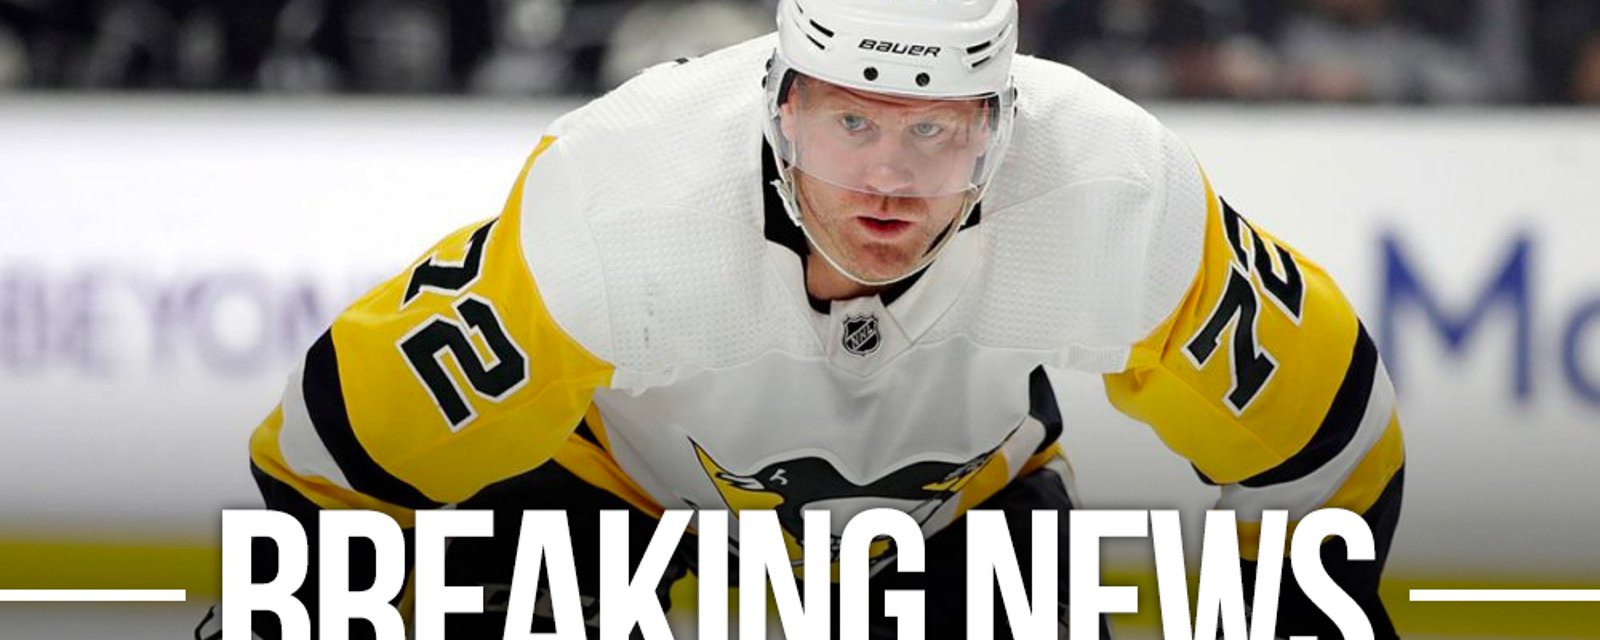 Hornqvist officially traded after Panthers add an extra player to deal